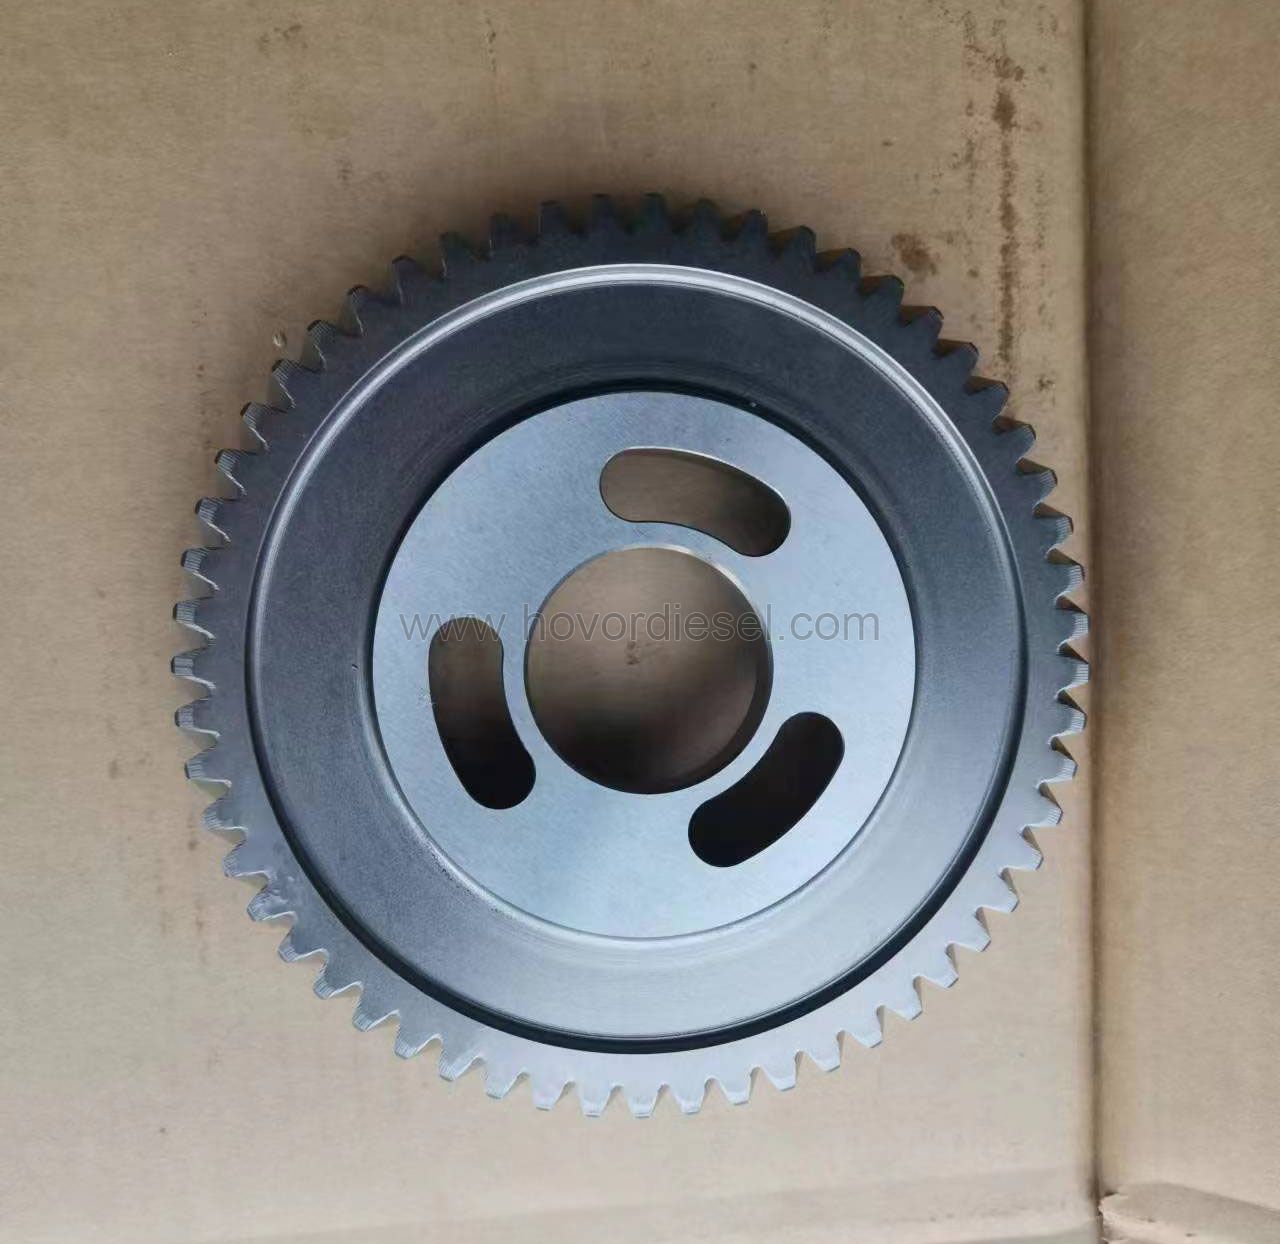 Diesel Engine Spare Parts BFL914 Toothed Gear 0423 4376 For Deutz